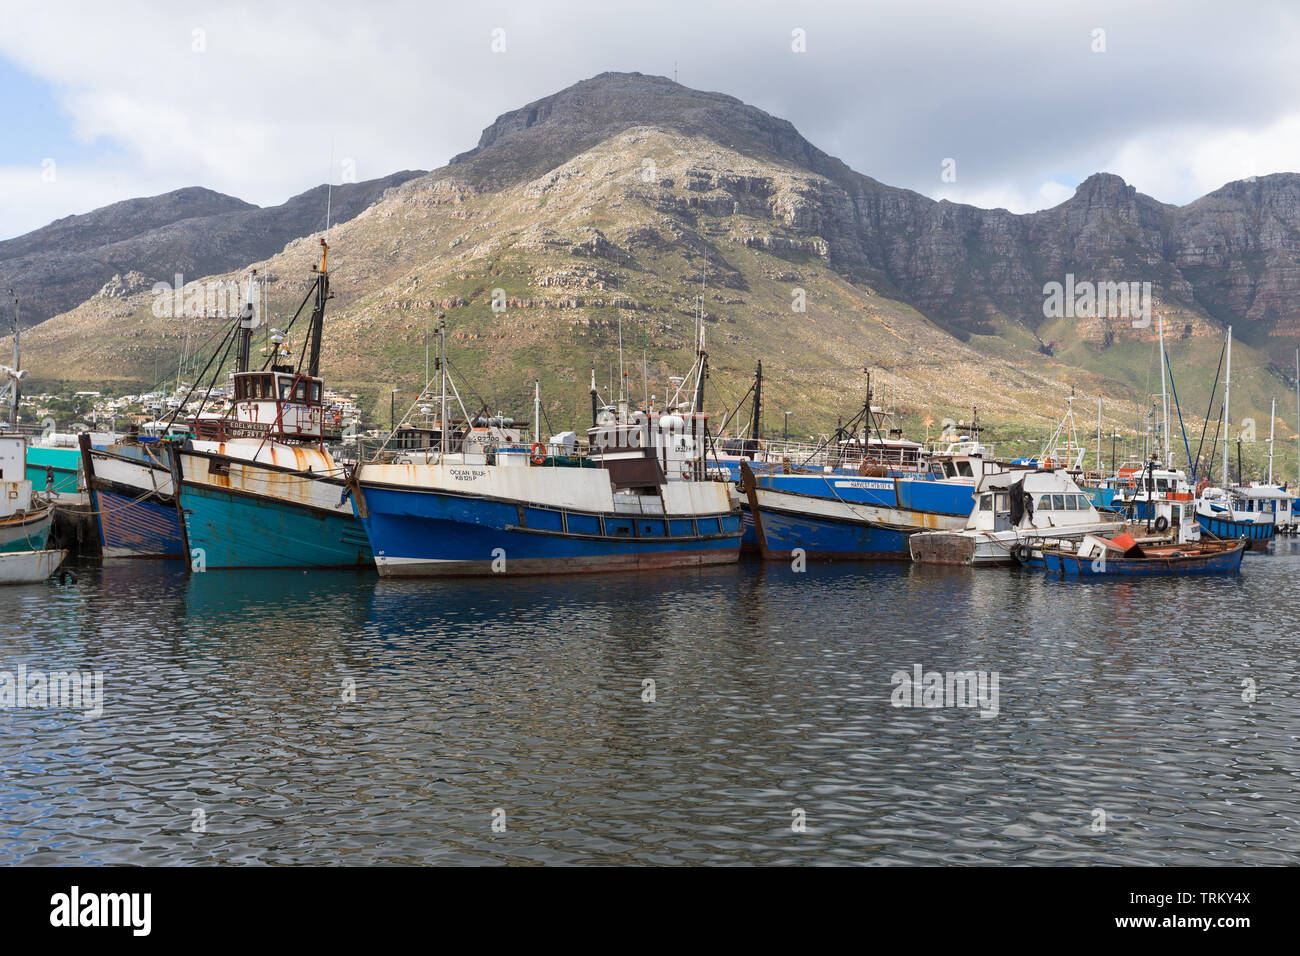 Hout Bay harbour and colourful commercial fishing boats or vessels against a backdrop of mountains in Cape Town, South Africa Stock Photo